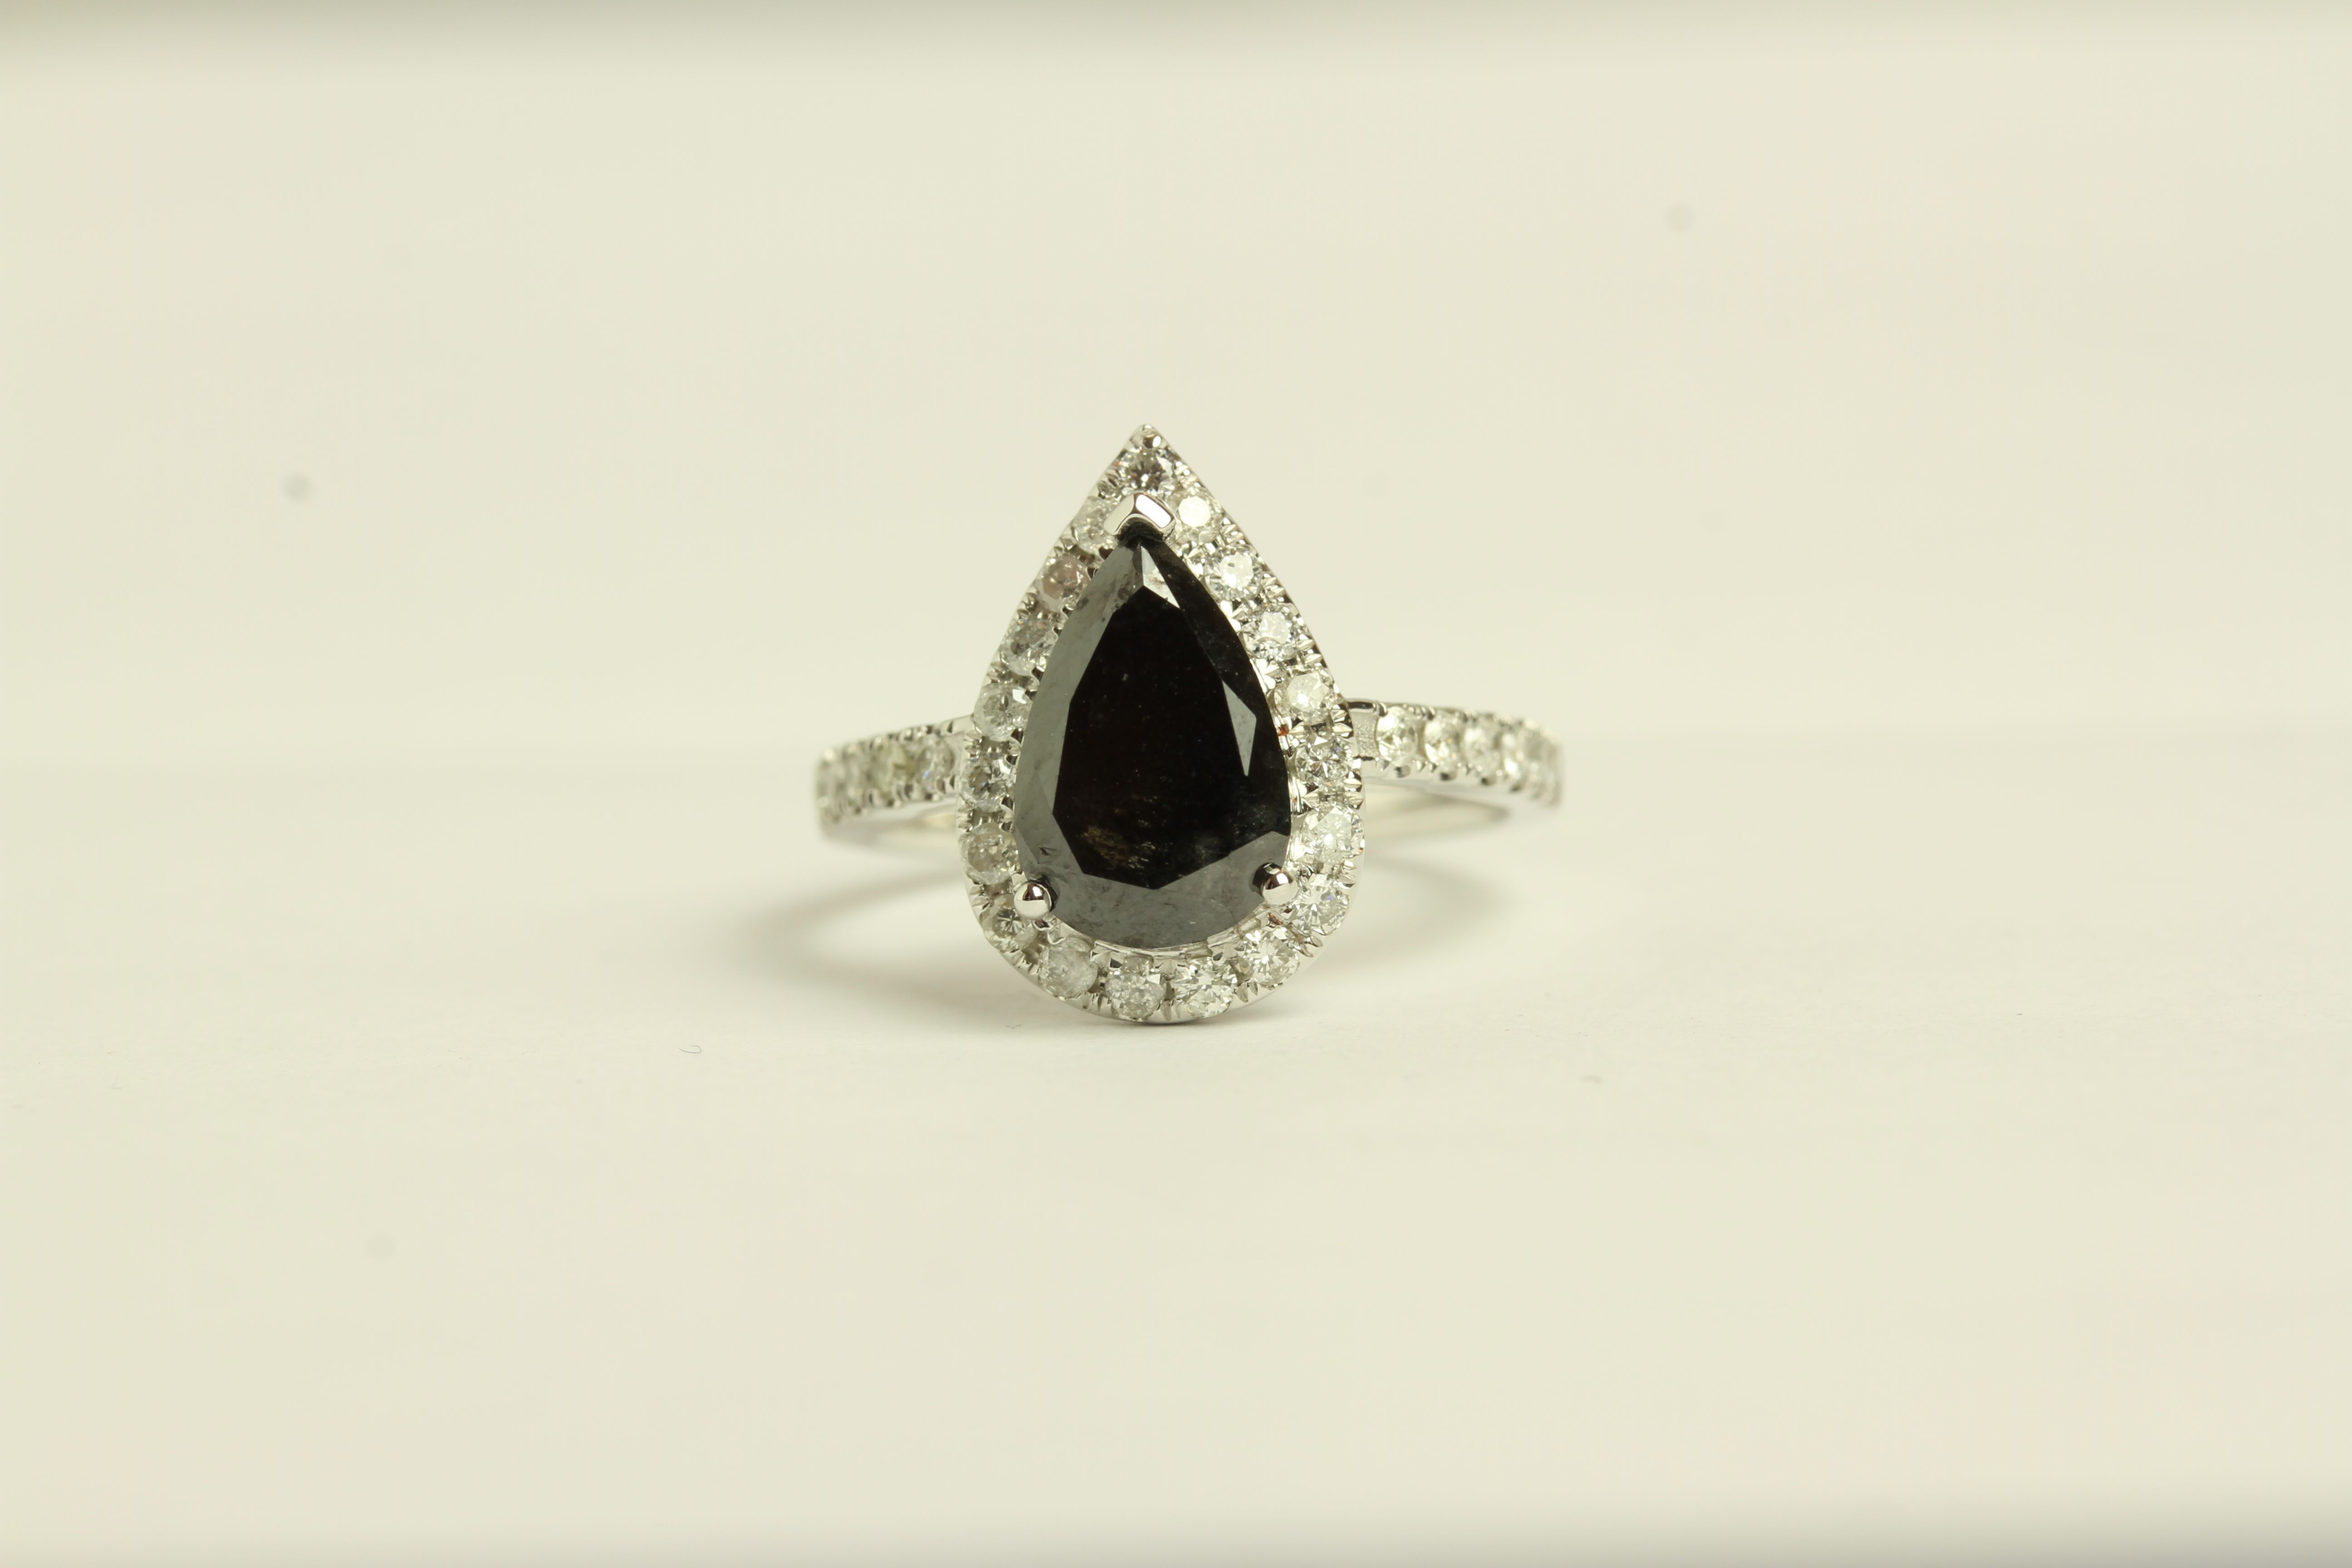 Black and White Diamond ring, set with 1 pear cut black diamond approximately 2.38ct,